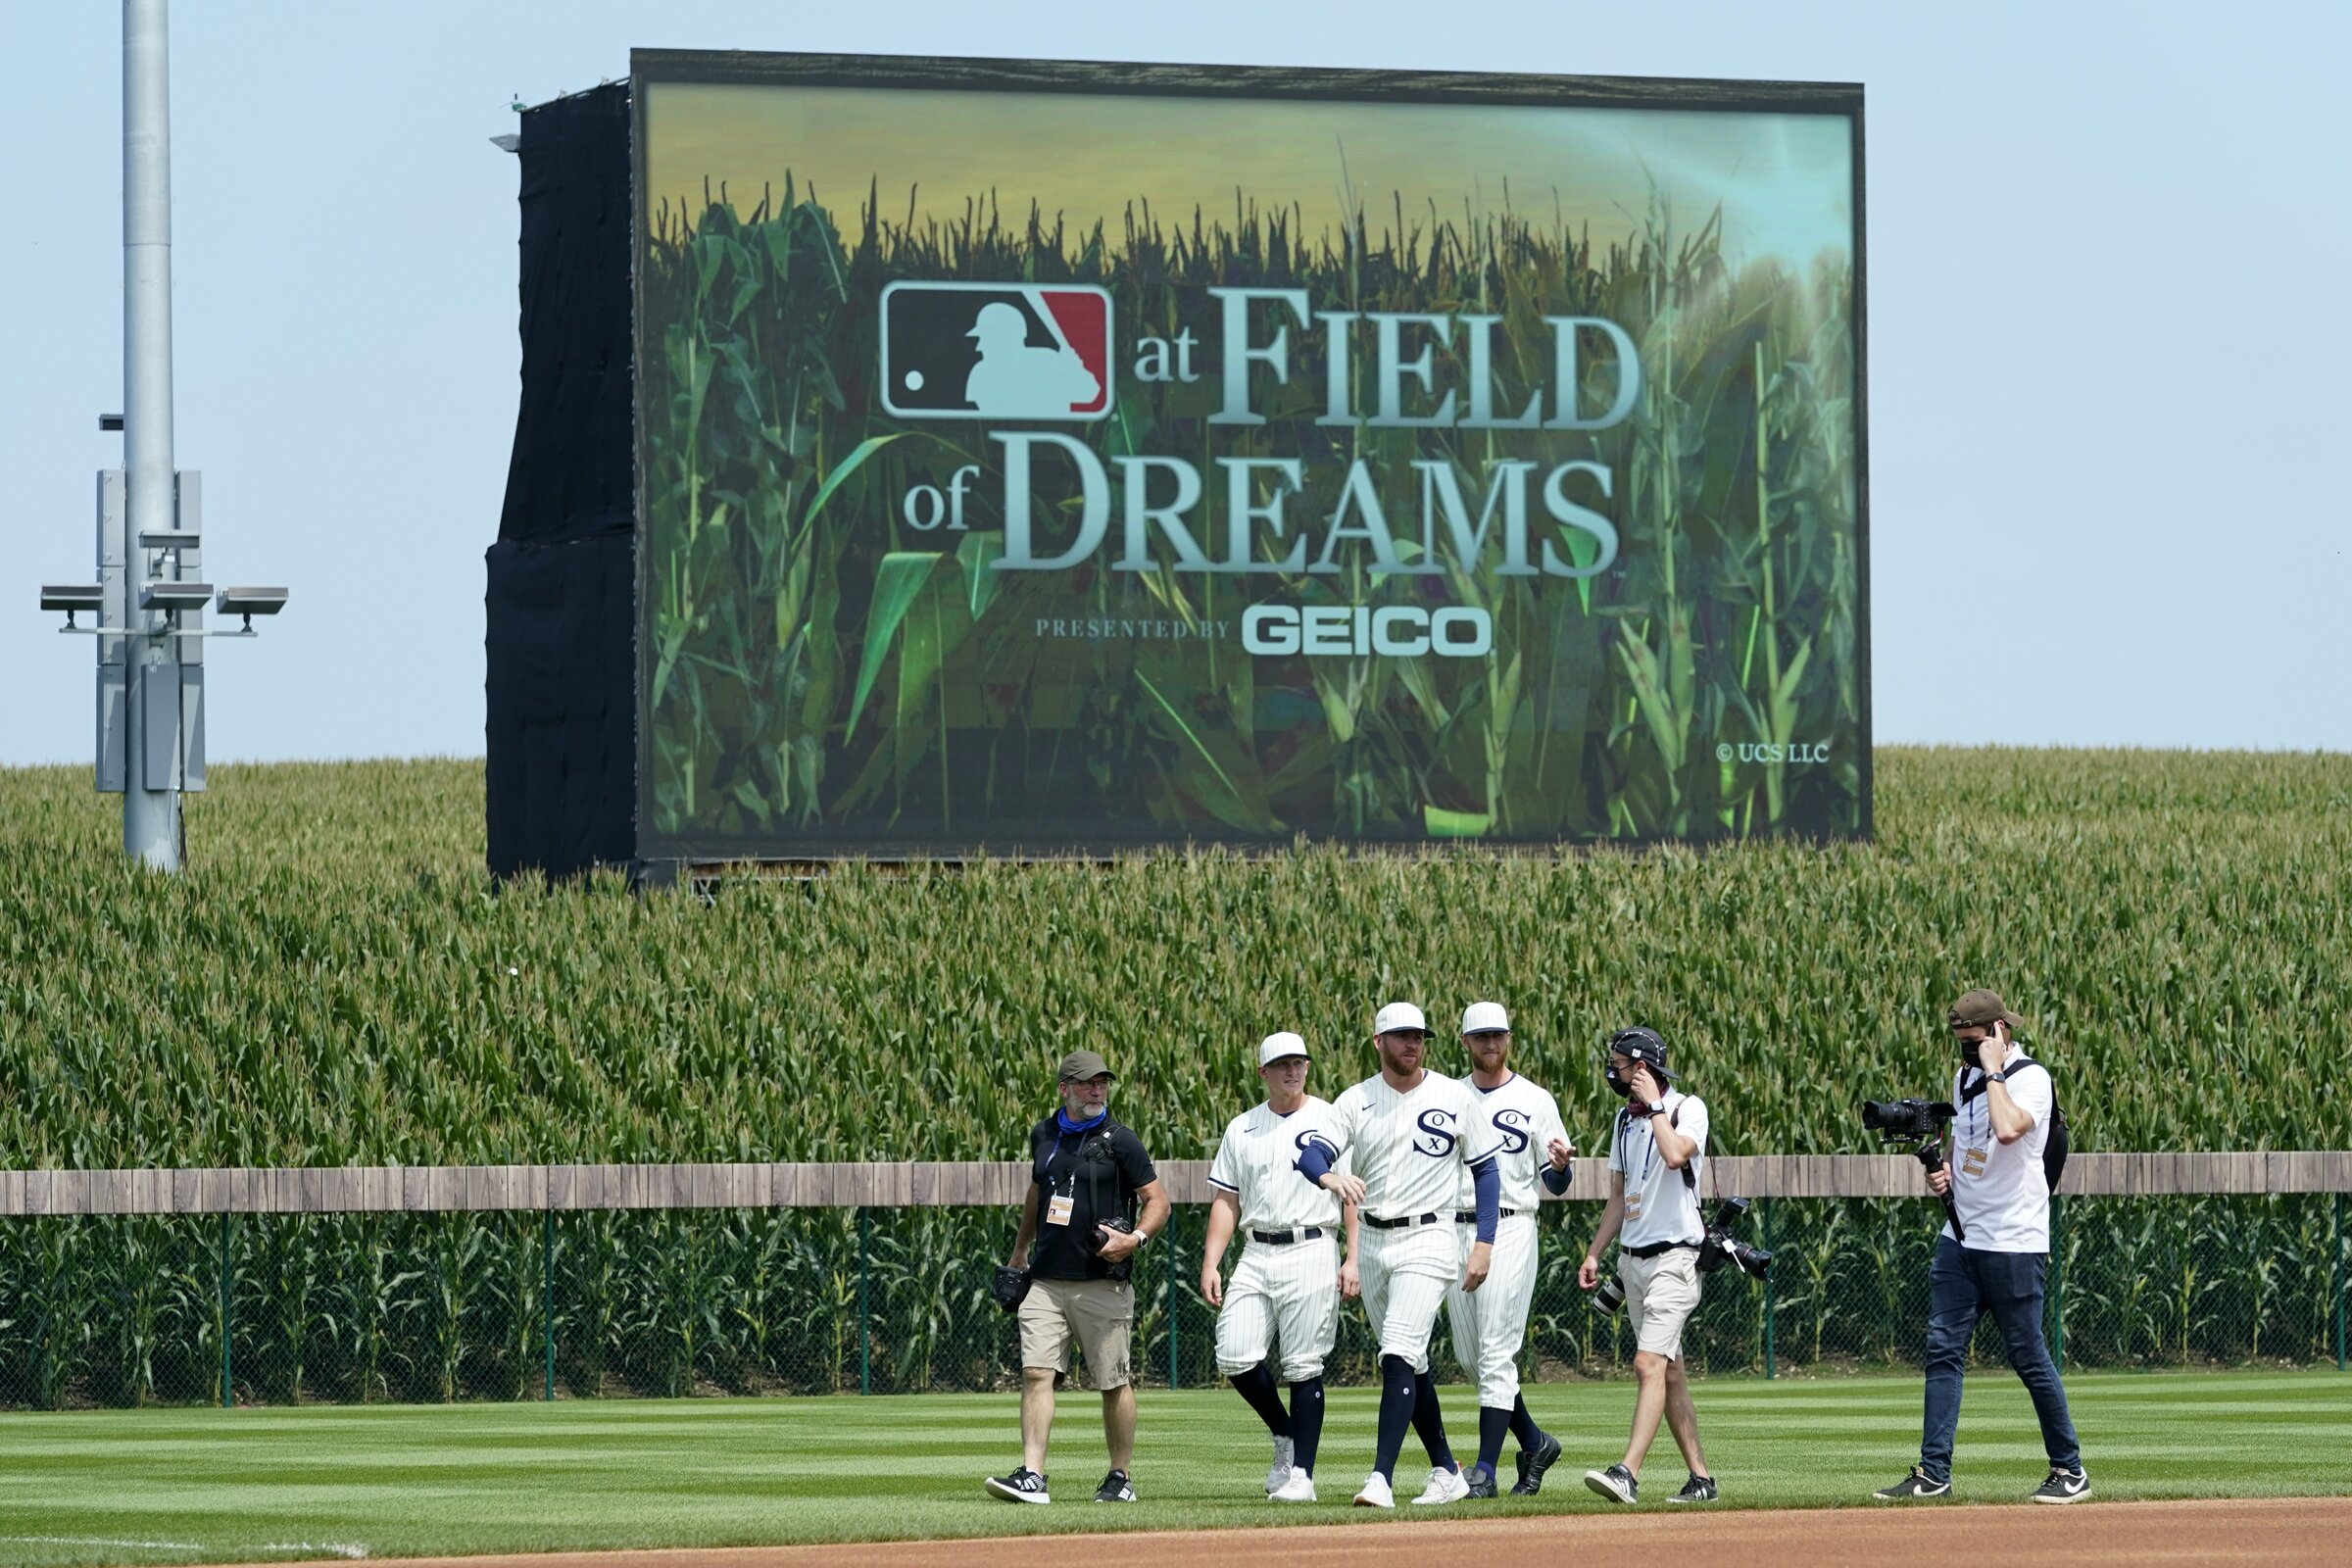 Field of Dreams: How to get Chicago Cubs and Cincinnati Reds